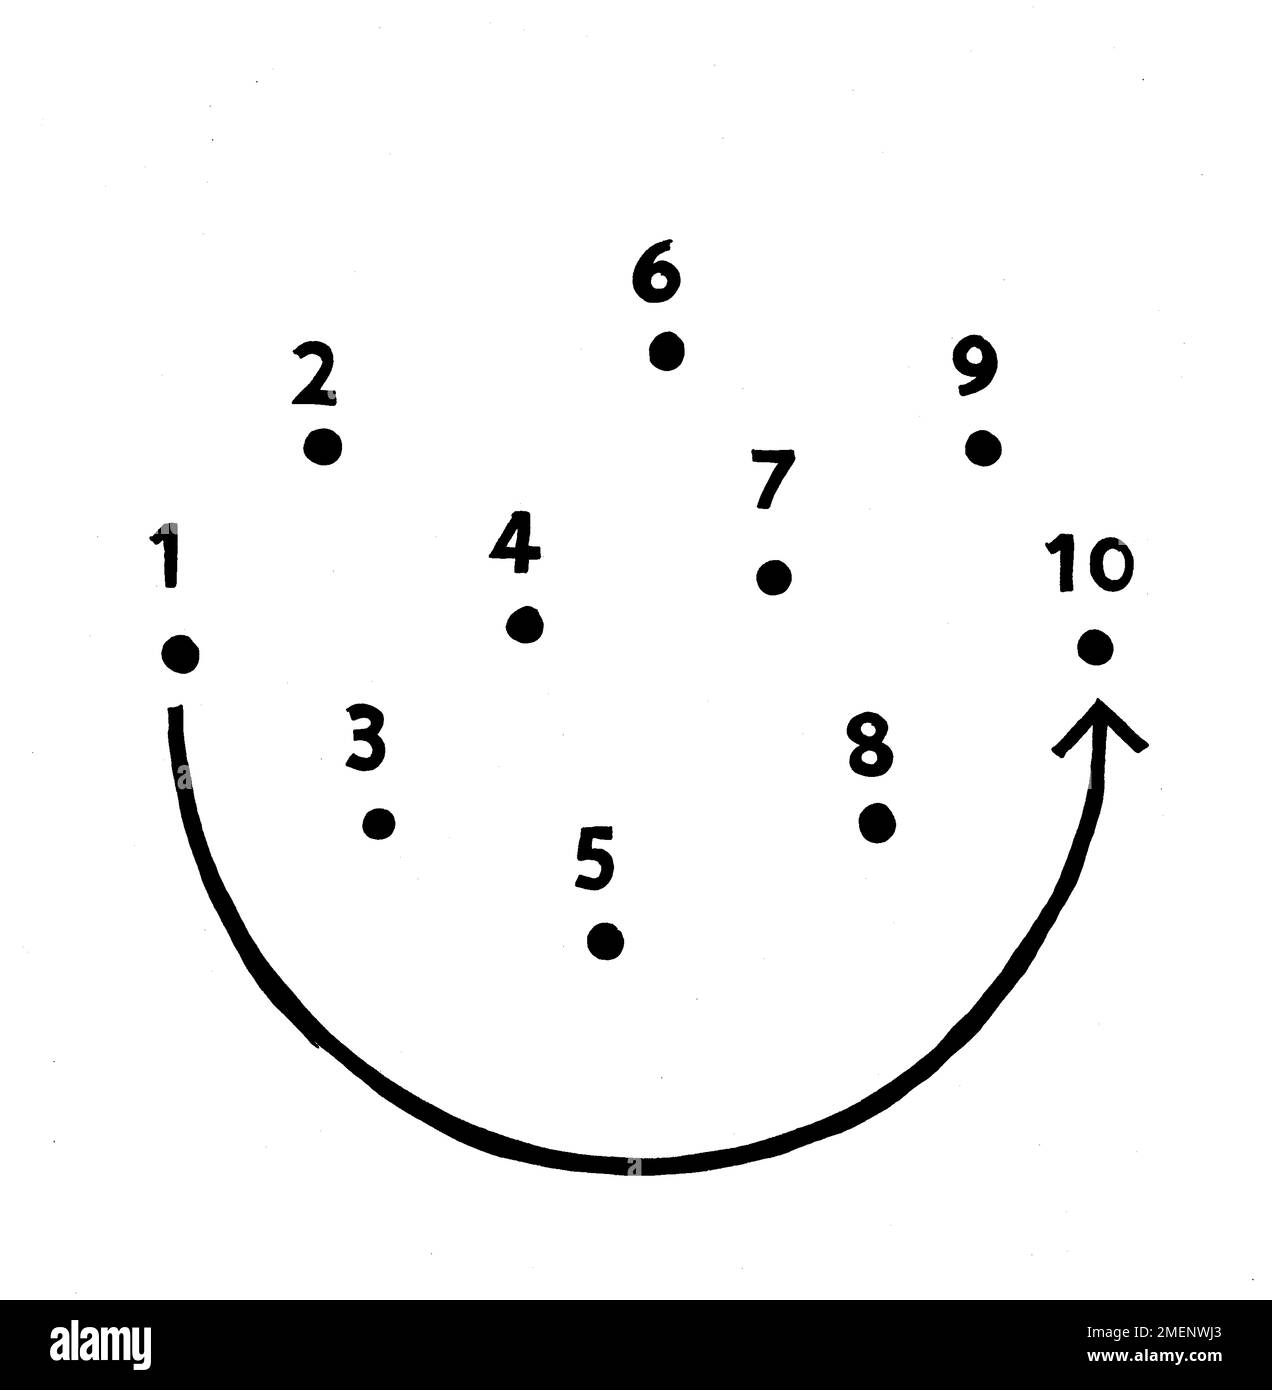 Black and white illustration of a series of dots numbered 1 to 10, with an arrow joining the first and last dots. Stock Photo